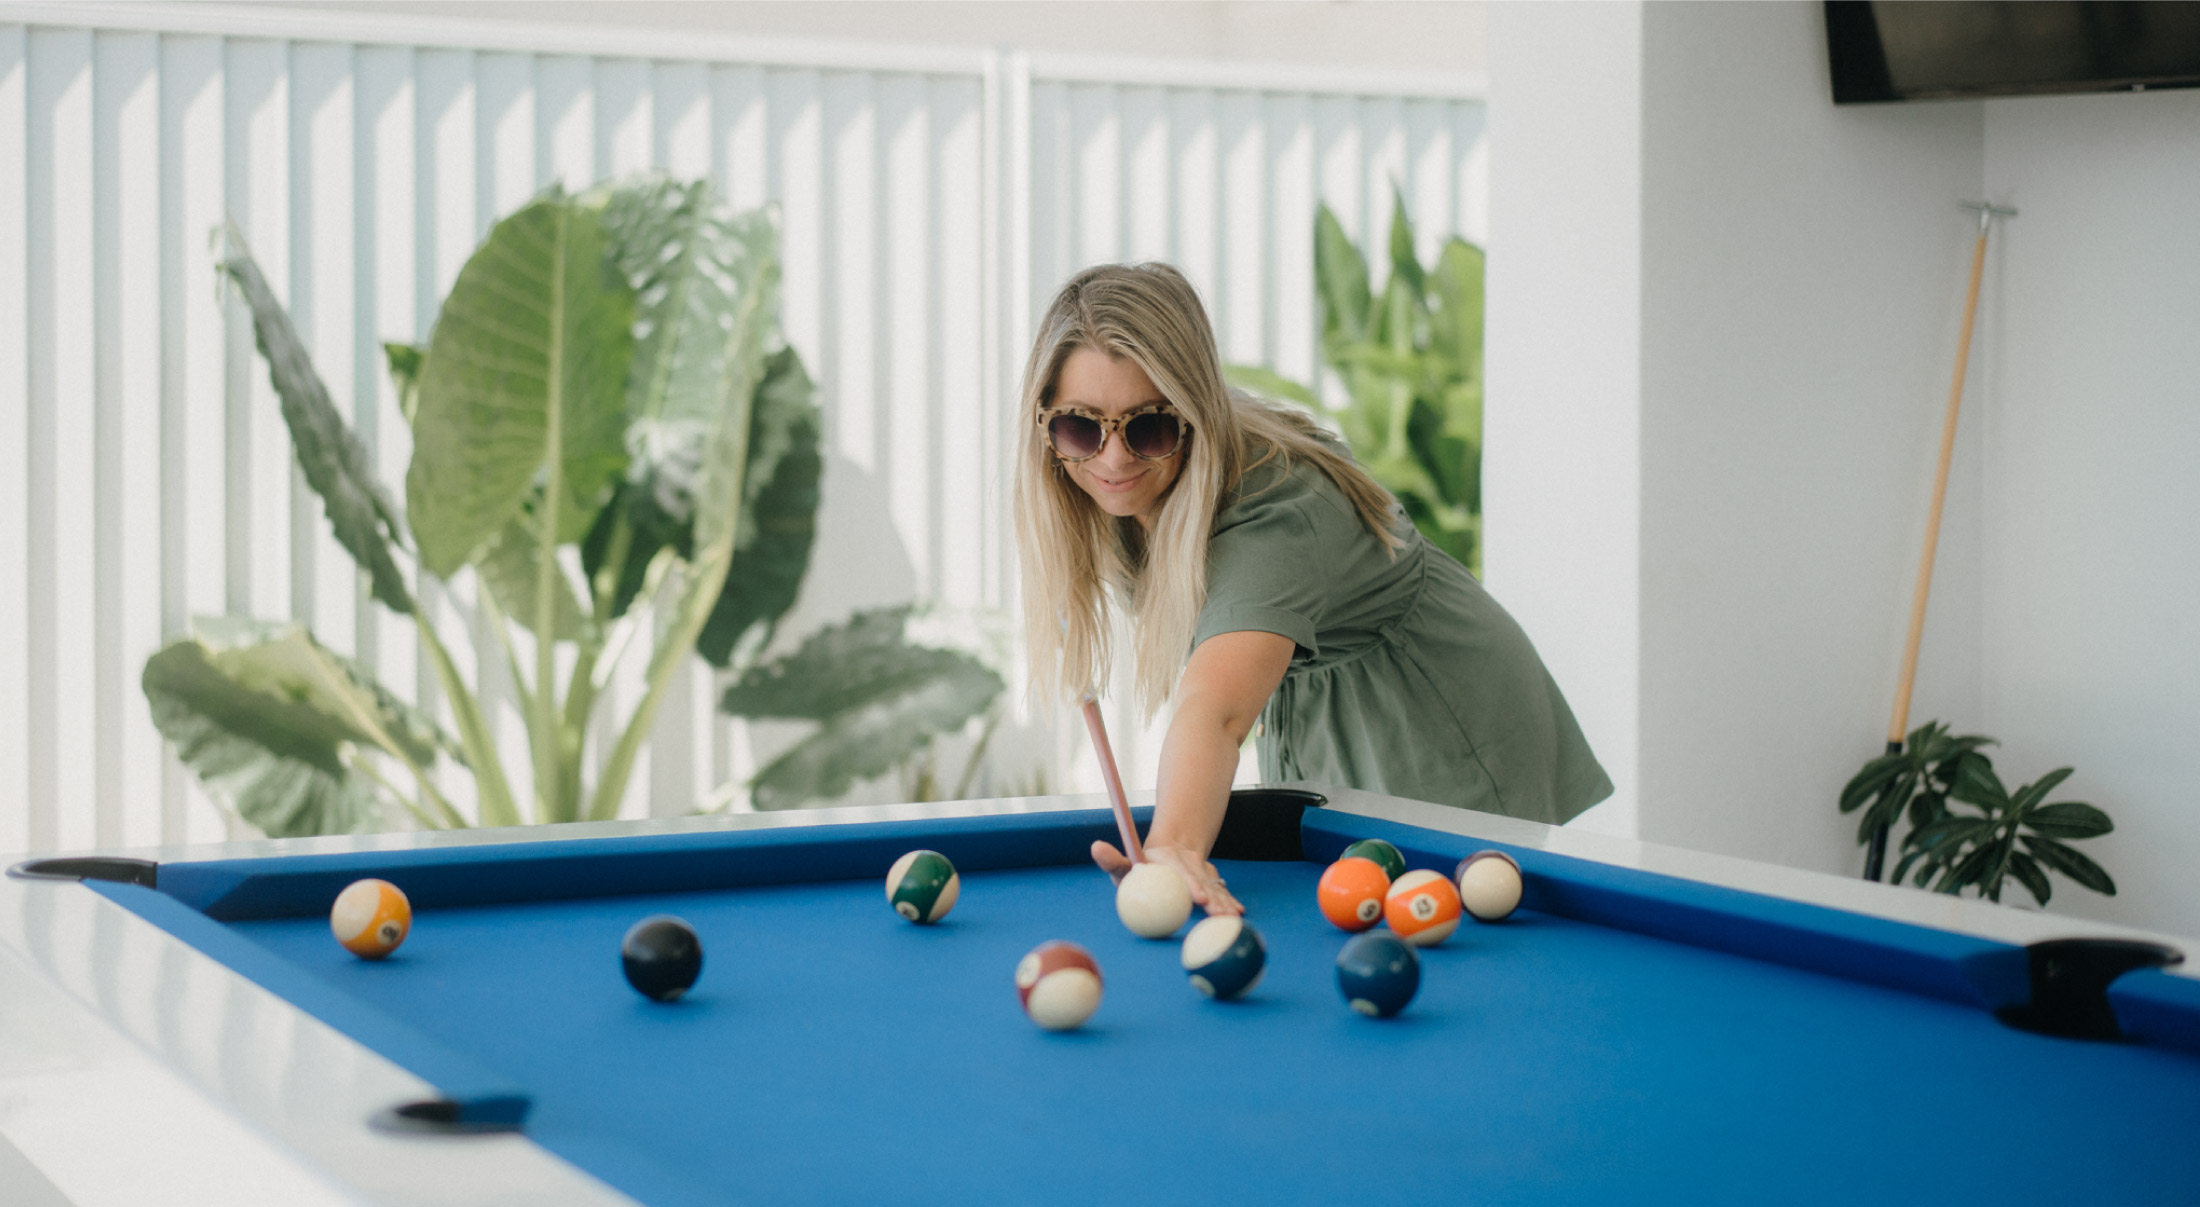 Woman playing pool on a white outdoor pool table with blue cloth